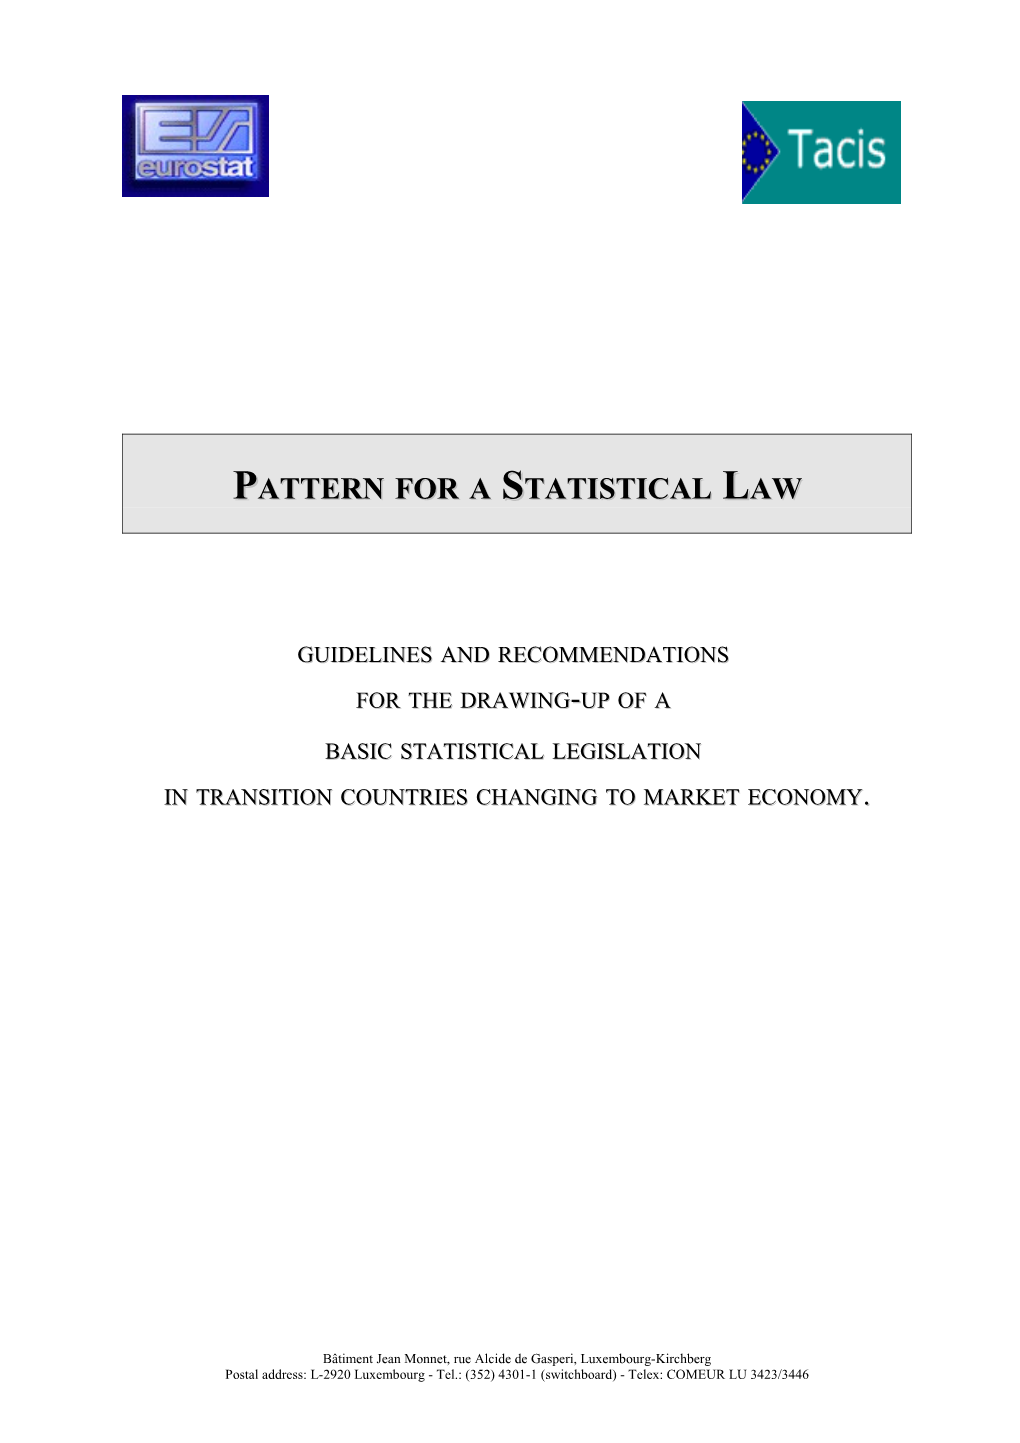 Pattern for a Statistical Law